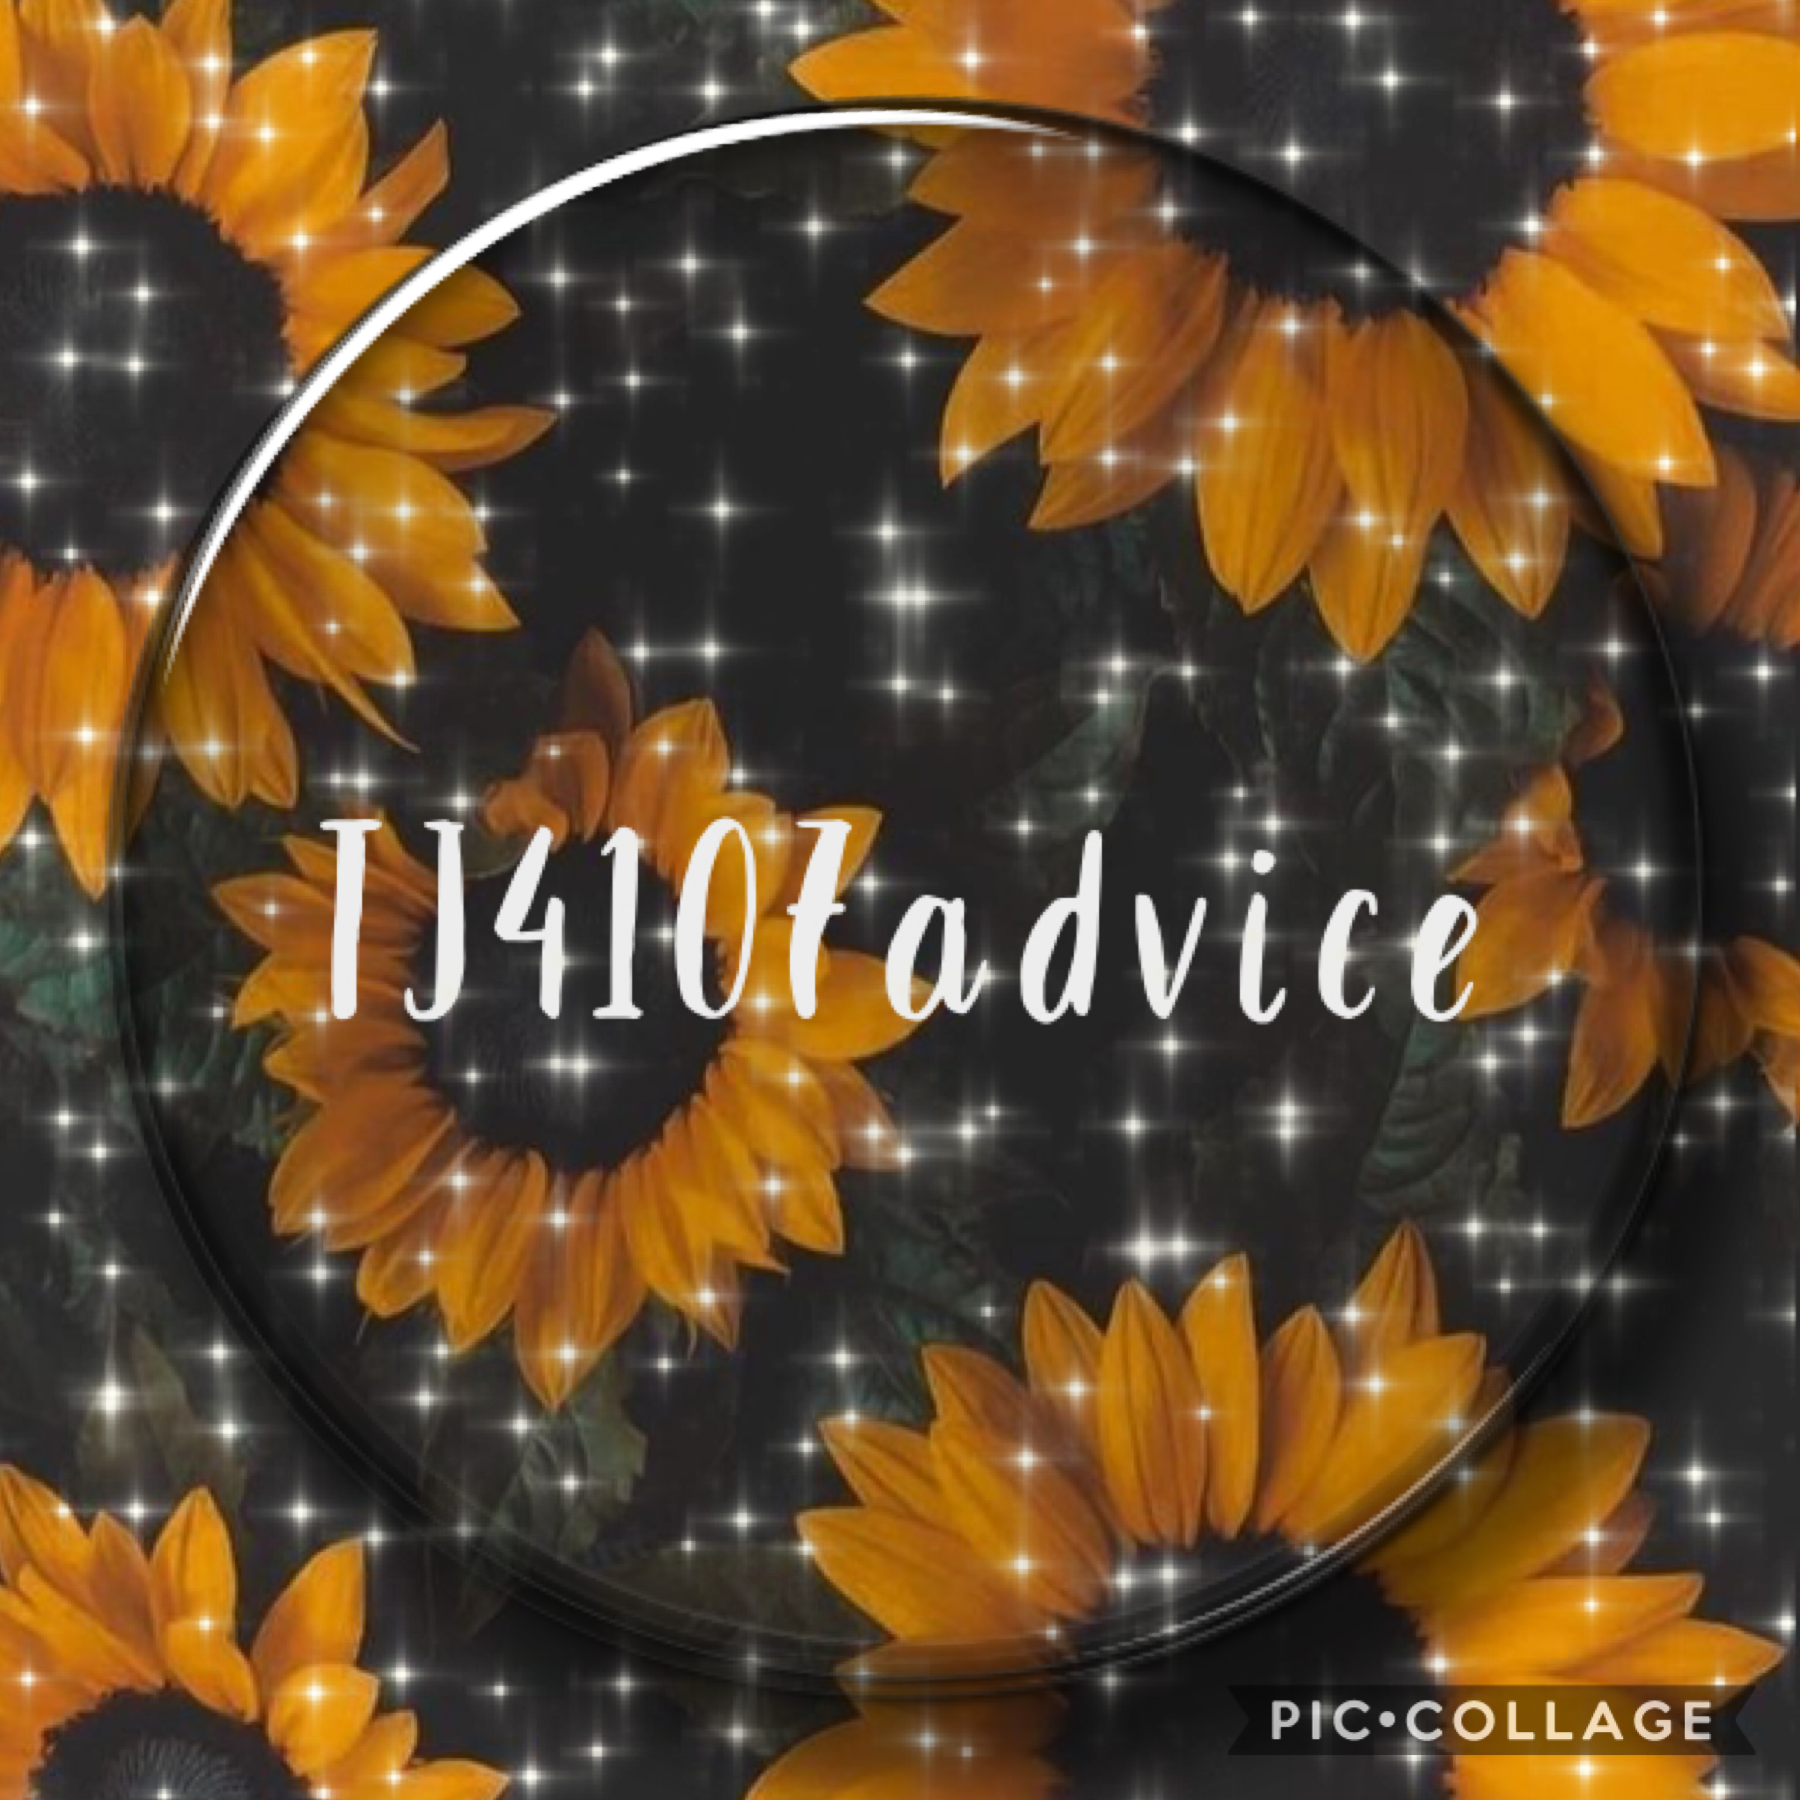 🌻🌻🌻🌻TAP🌻🌻🌻🌻

Srry for the last post I forgot the "advice" part 😆 hope y'all r doing well! Thx for all the support! 